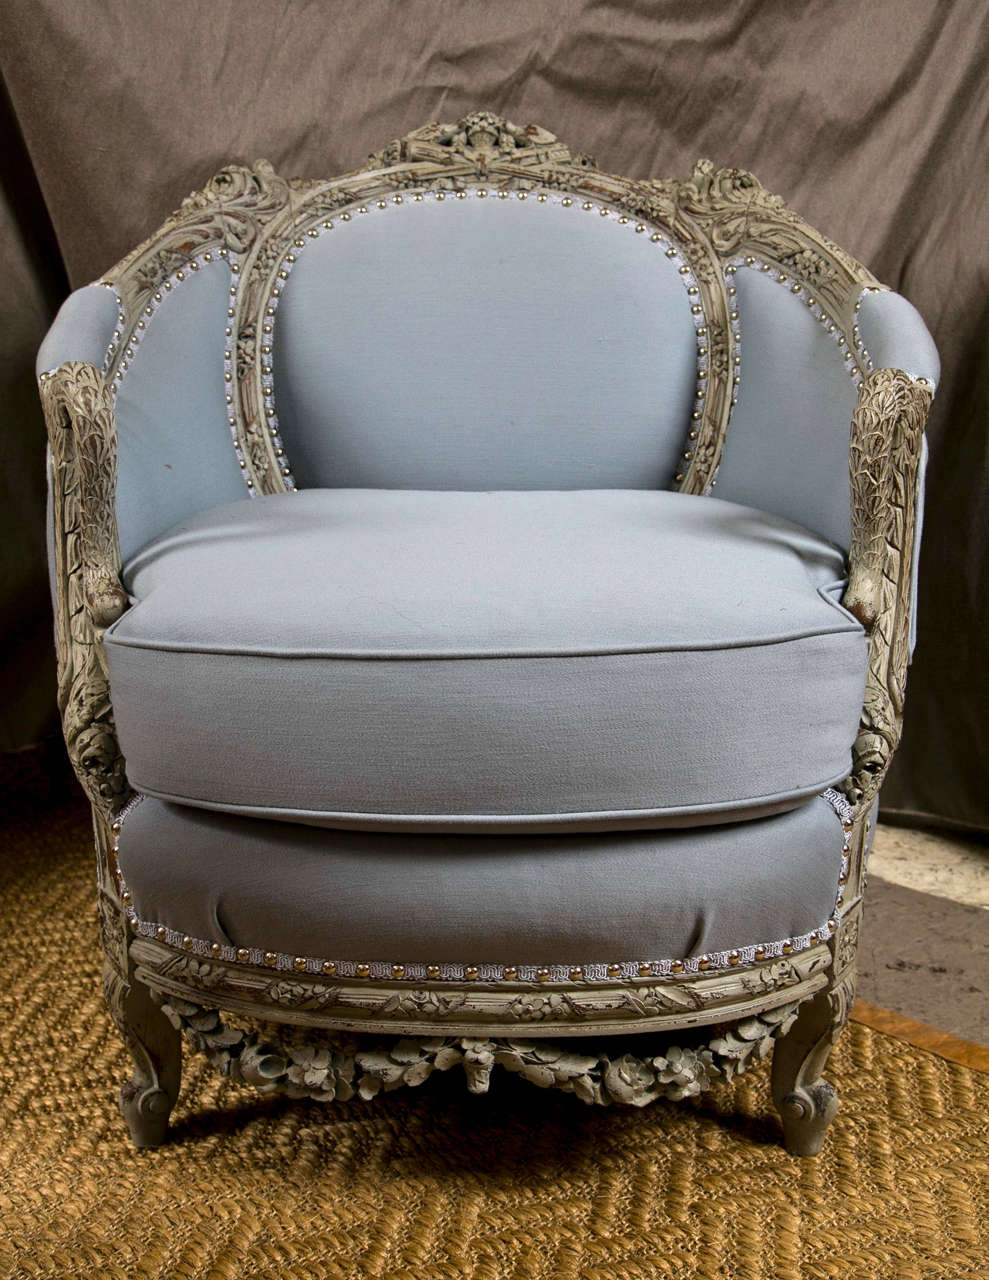 An Antique Swedish Painted Decorated Swan Arm Chair 1